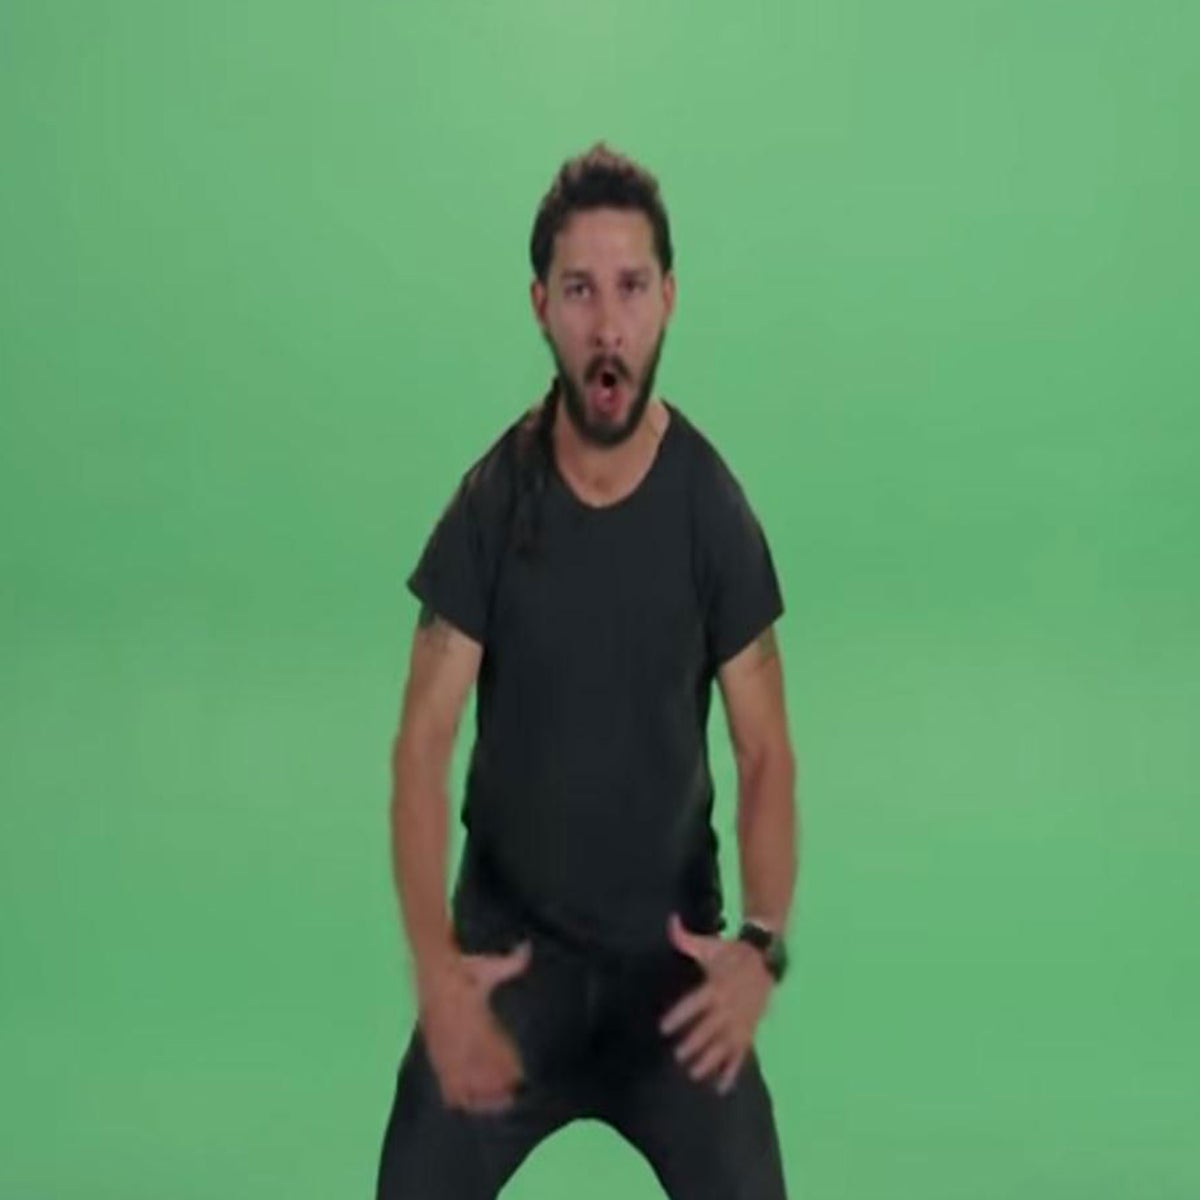 Shia LaBeouf's extremely loud motivational speech, explained - Vox